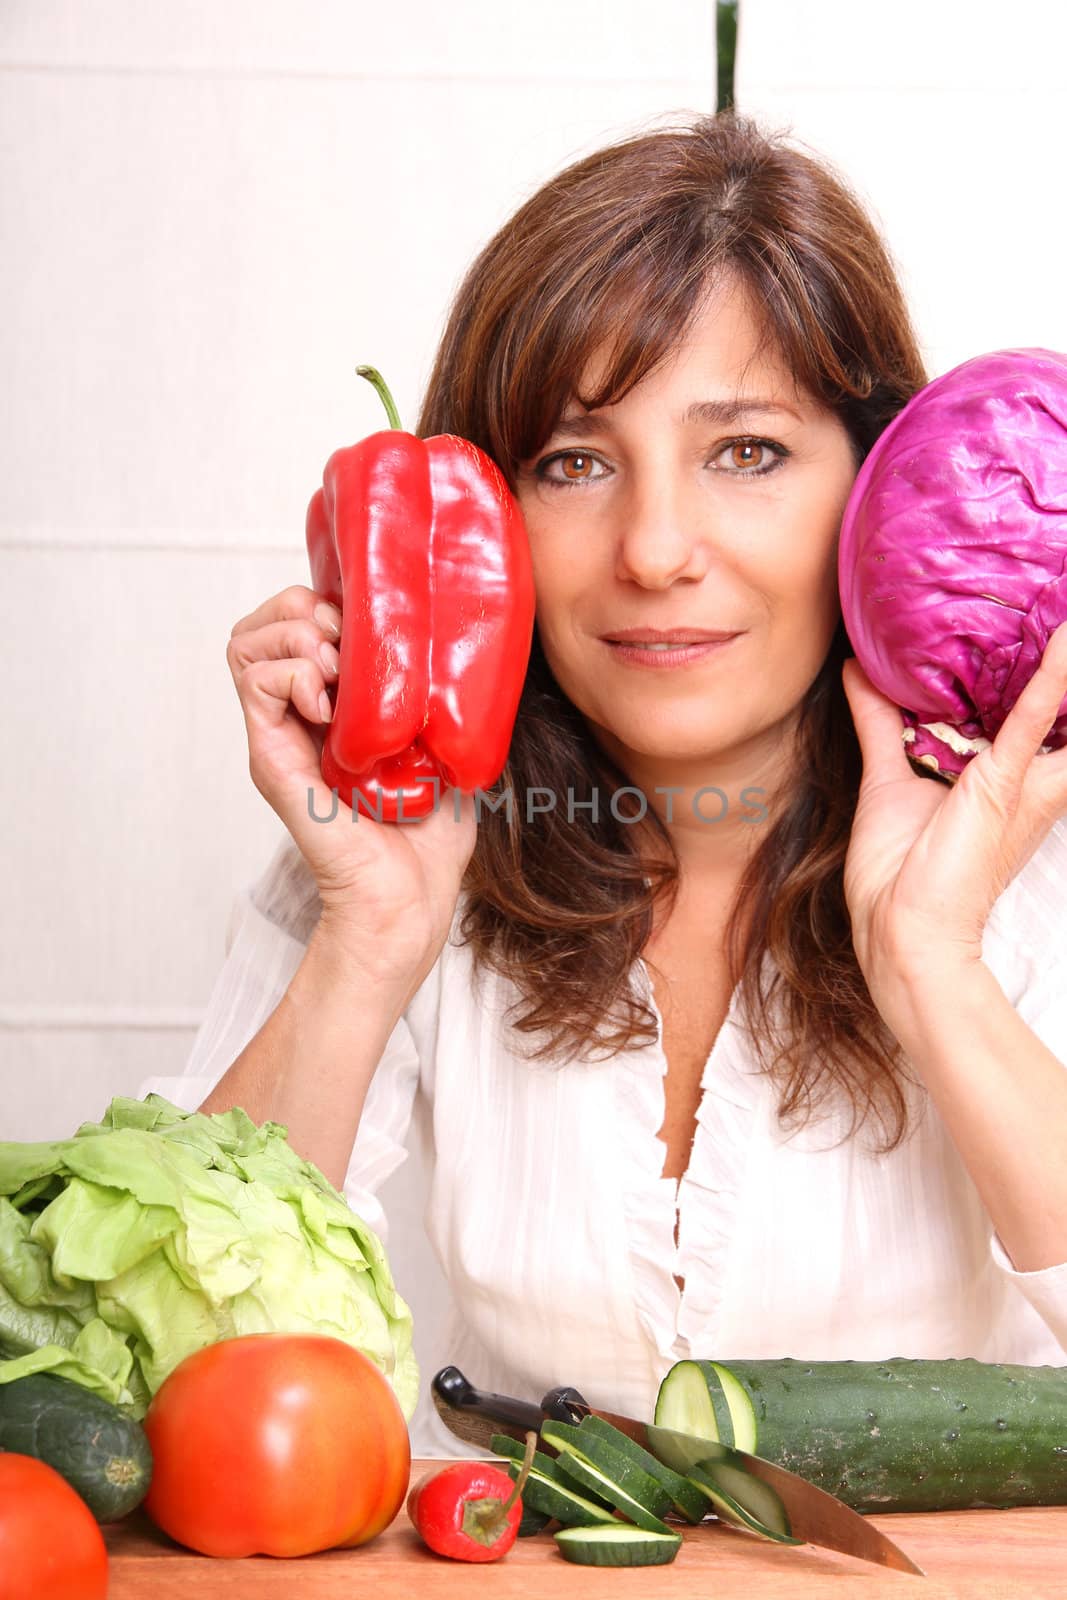 A mature woman holding vegetables.